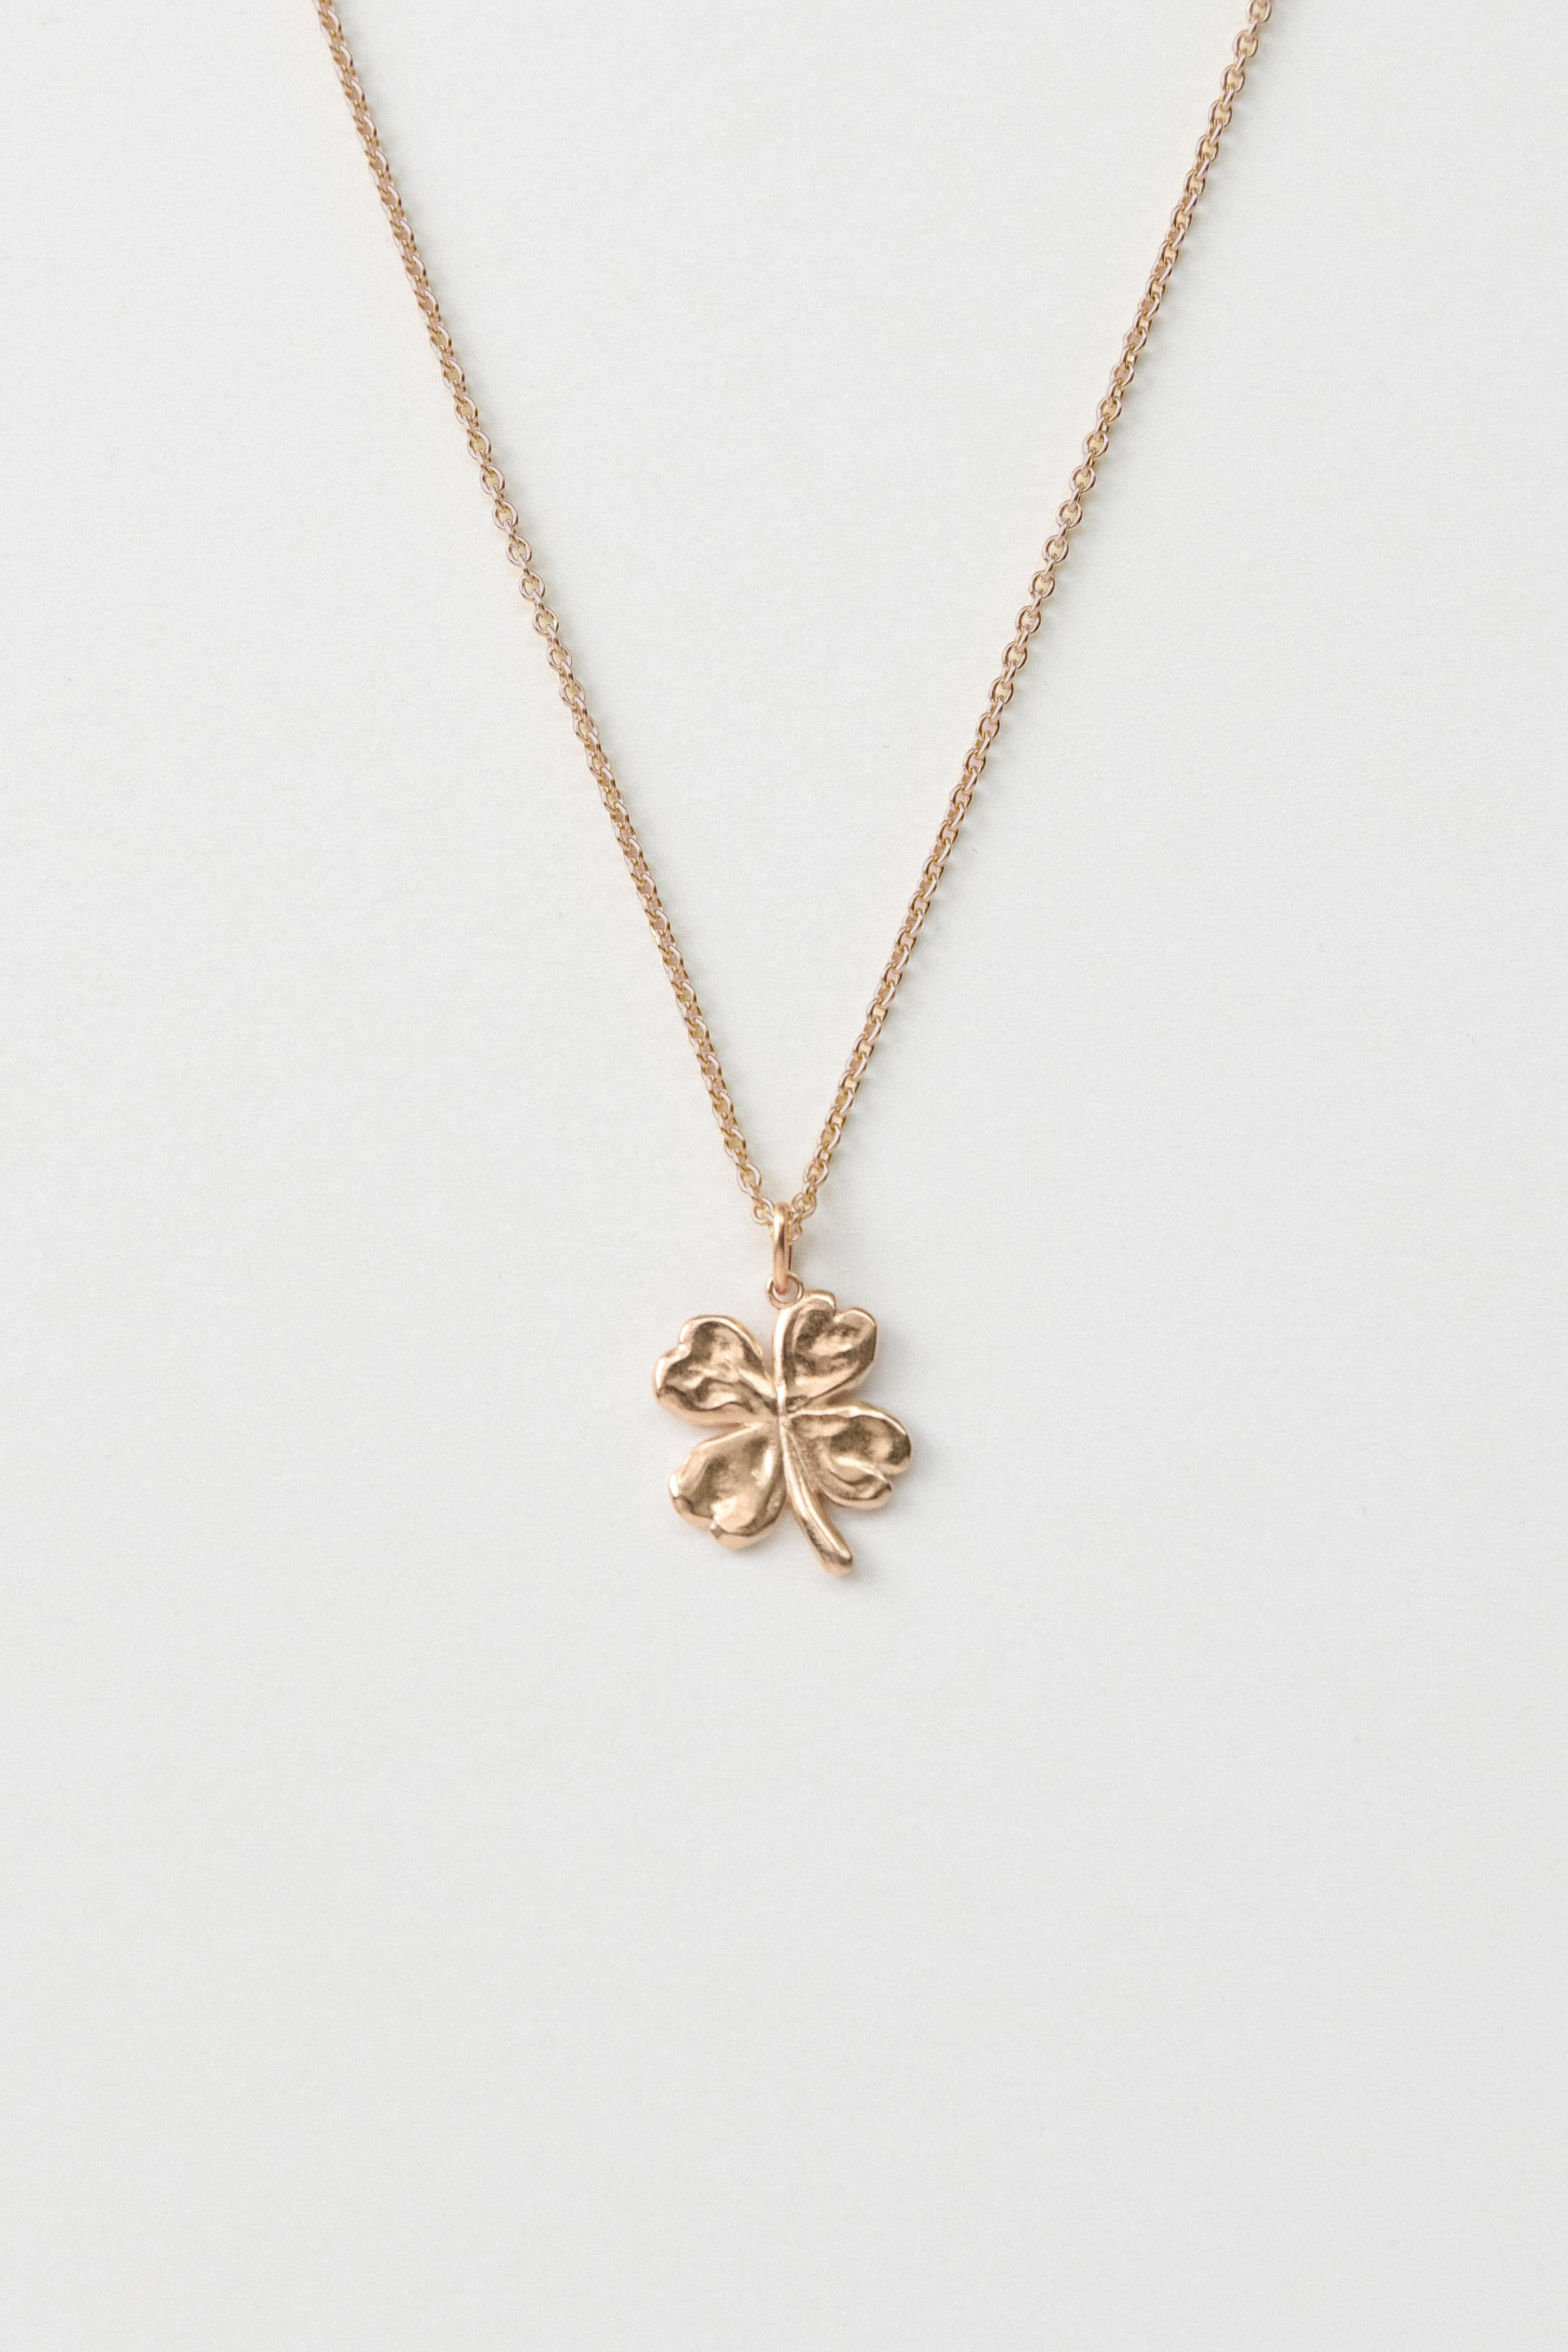 AIDA x Hypend Lucky Clover Necklace Recycled 14k Gold